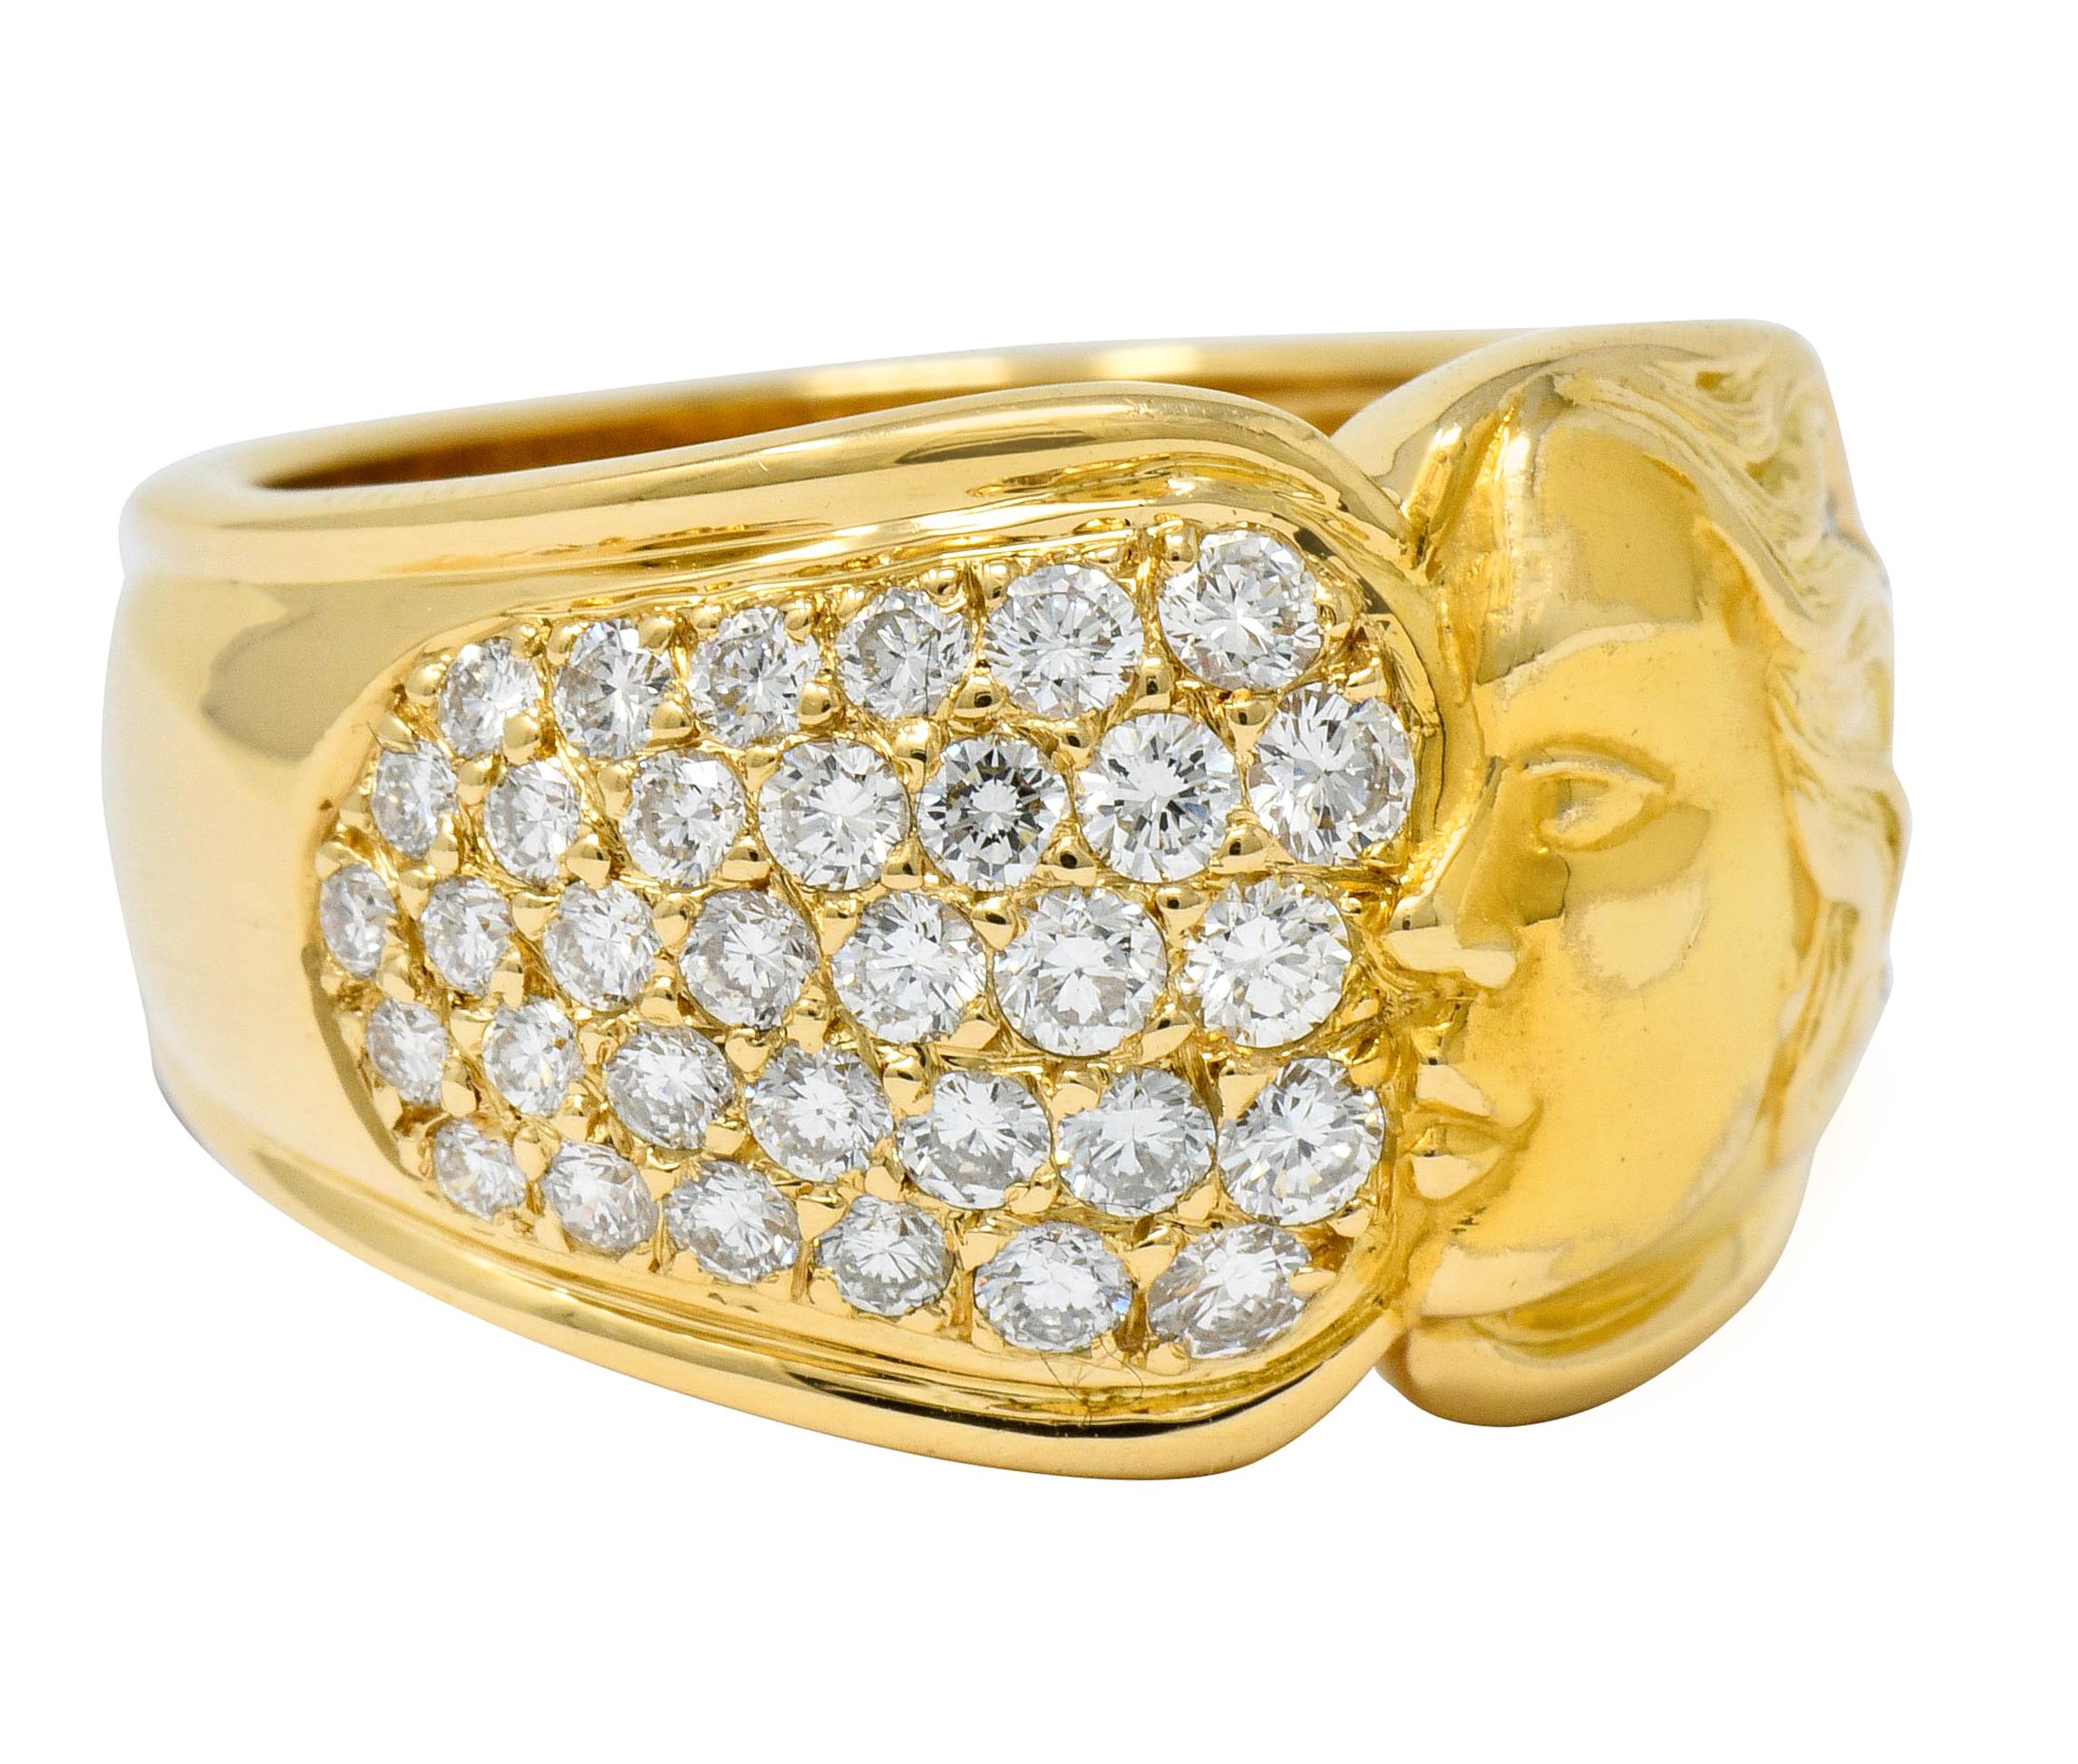 Band style ring depicting a profile of a woman with windswept hair accented by diamonds

Facing a pavè field of round brilliant cut diamonds that graduate in size

Total diamond weight is approximately 1.50 carat total, F/G color with VS